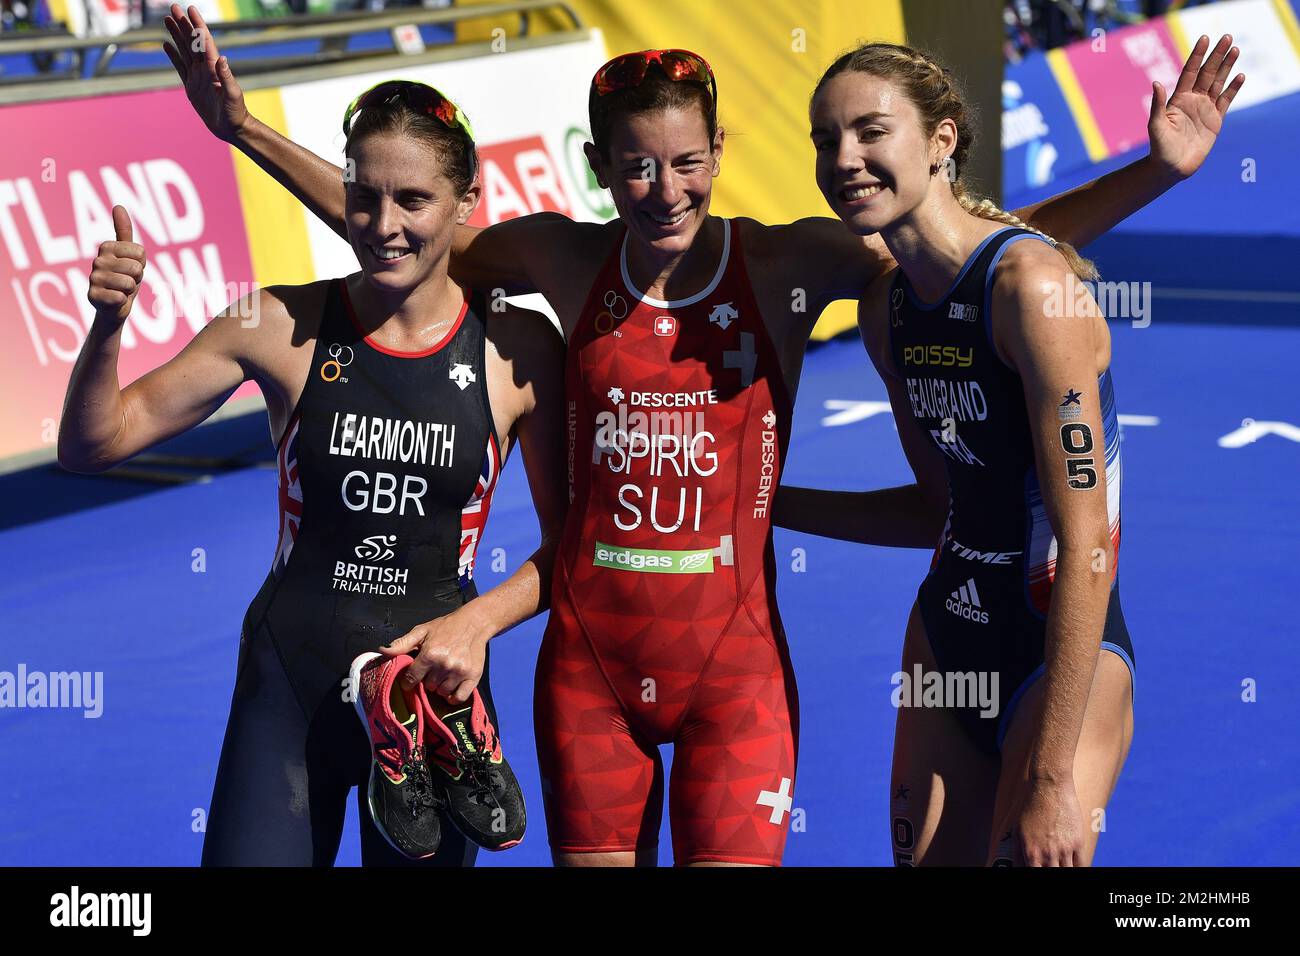 L-R, silver medalist Great Britain Jess Learmonth, Winner Swiss Nicola Spirig and Bronze medalist French Cassandre Beaugrand celebrate after the finish line of the women's triathlon event at the European Championships, in Glasgow, Scotland, Thursday 09 August 2018. European championships of several sports will be held in Glasgow from 03 to 12 August. BELGA PHOTO ERIC LALMAND Stock Photo